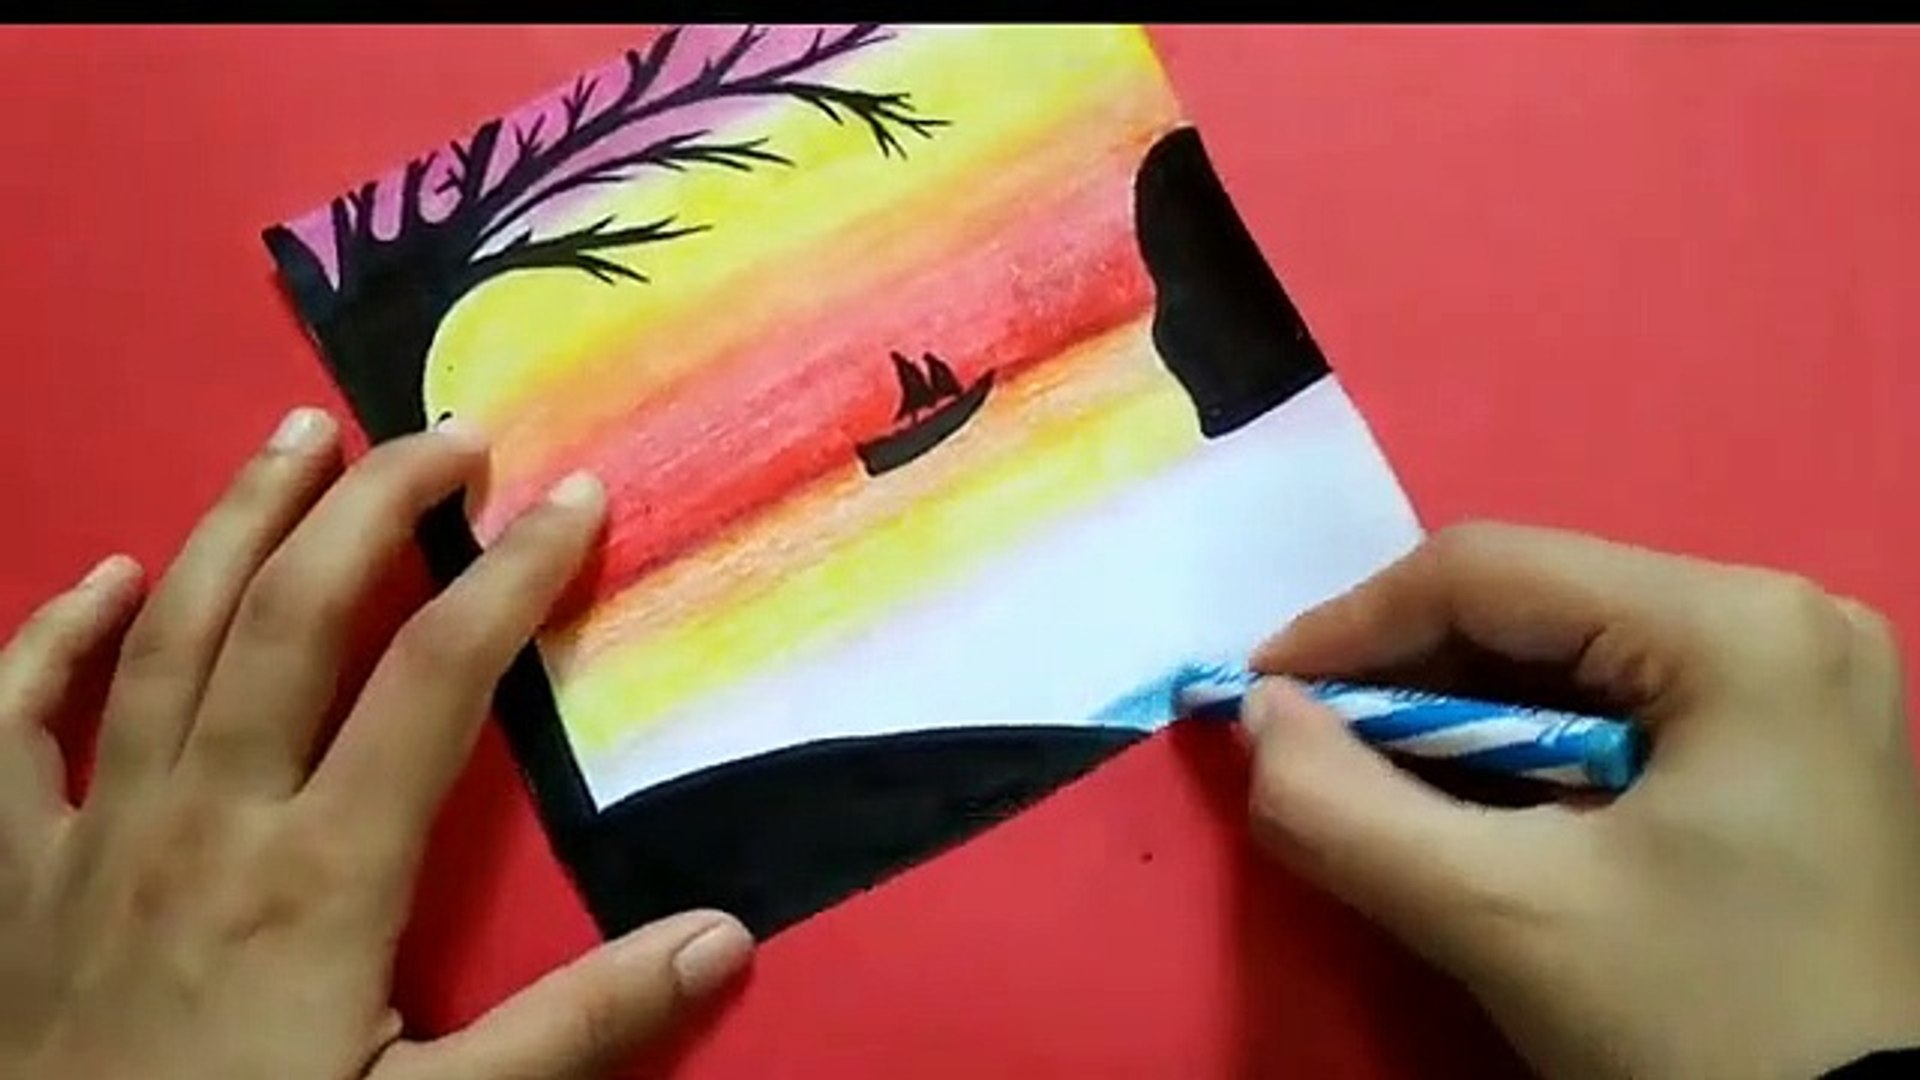 How to draw scenery with wax crayons - crayon painting idea - video  Dailymotion